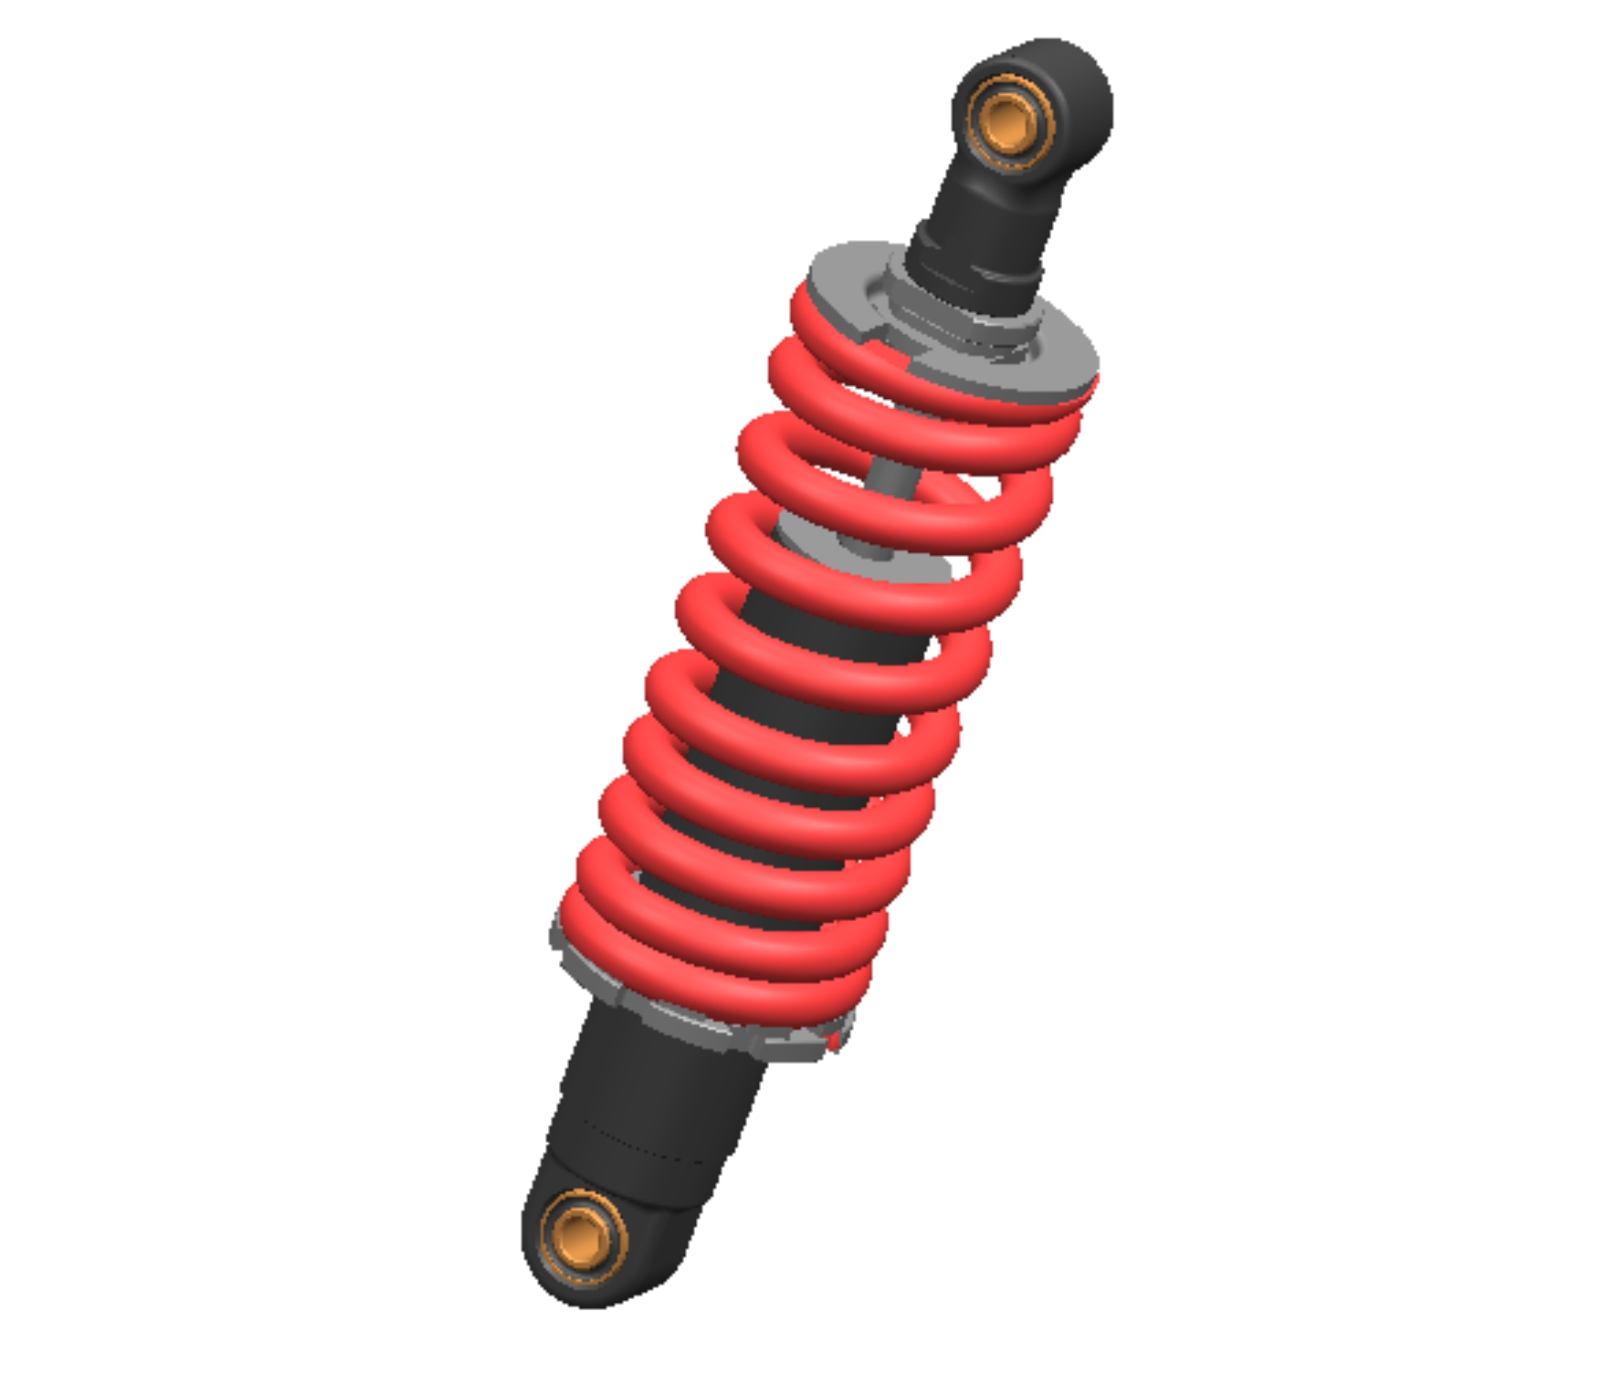 apache rtr 160 shock absorber price